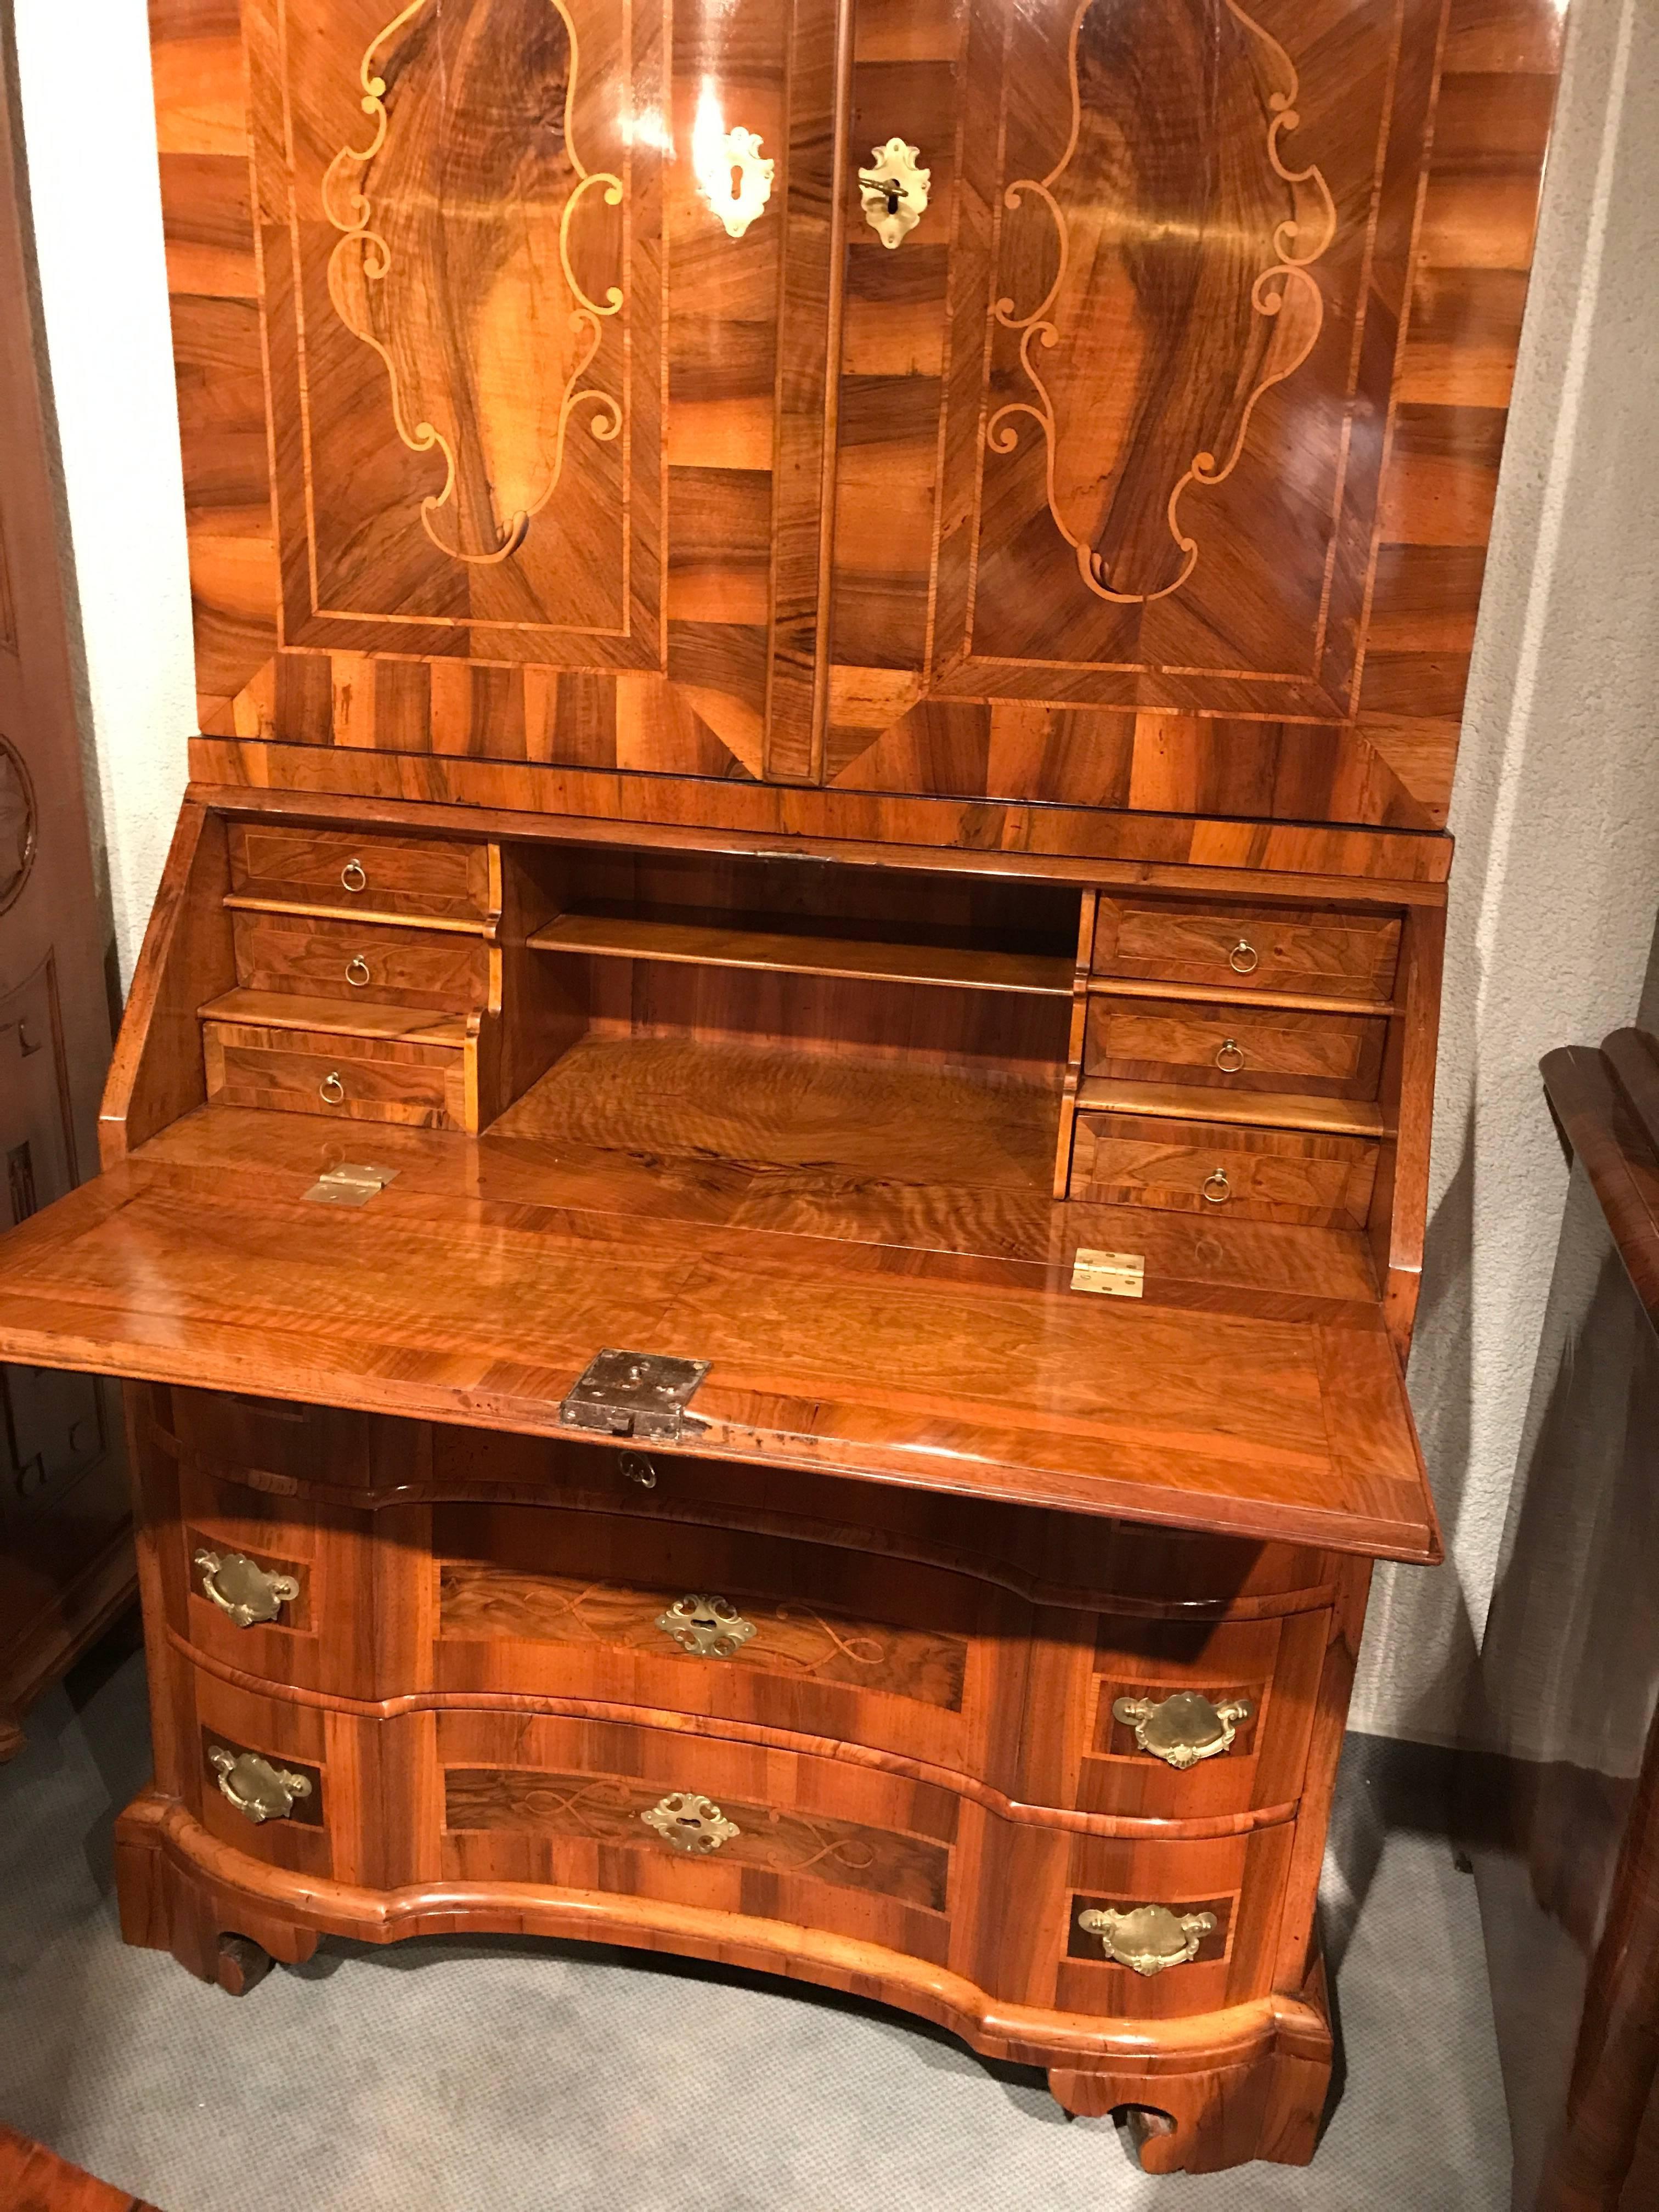 18th century Baroque cabinet with secretaire, Germany, 1760, walnut veneer. Beautiful piece in excellent condition, professionally restored. The cabinet will be shipped from Germany.
  